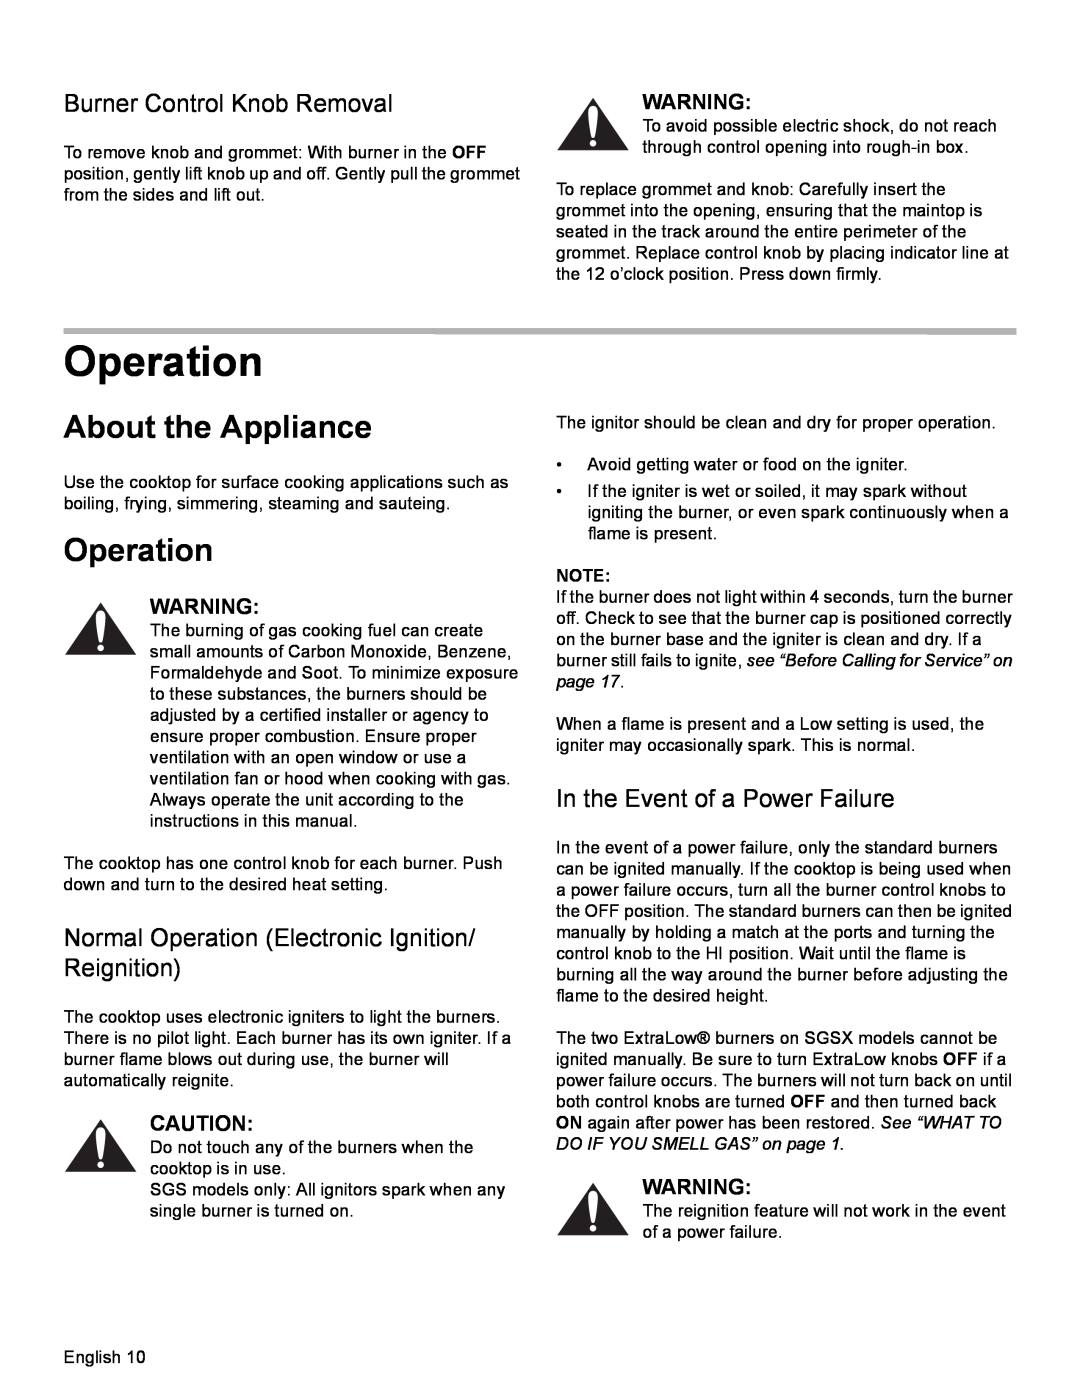 Bosch Appliances SGSX manual Operation, About the Appliance, Burner Control Knob Removal, In the Event of a Power Failure 